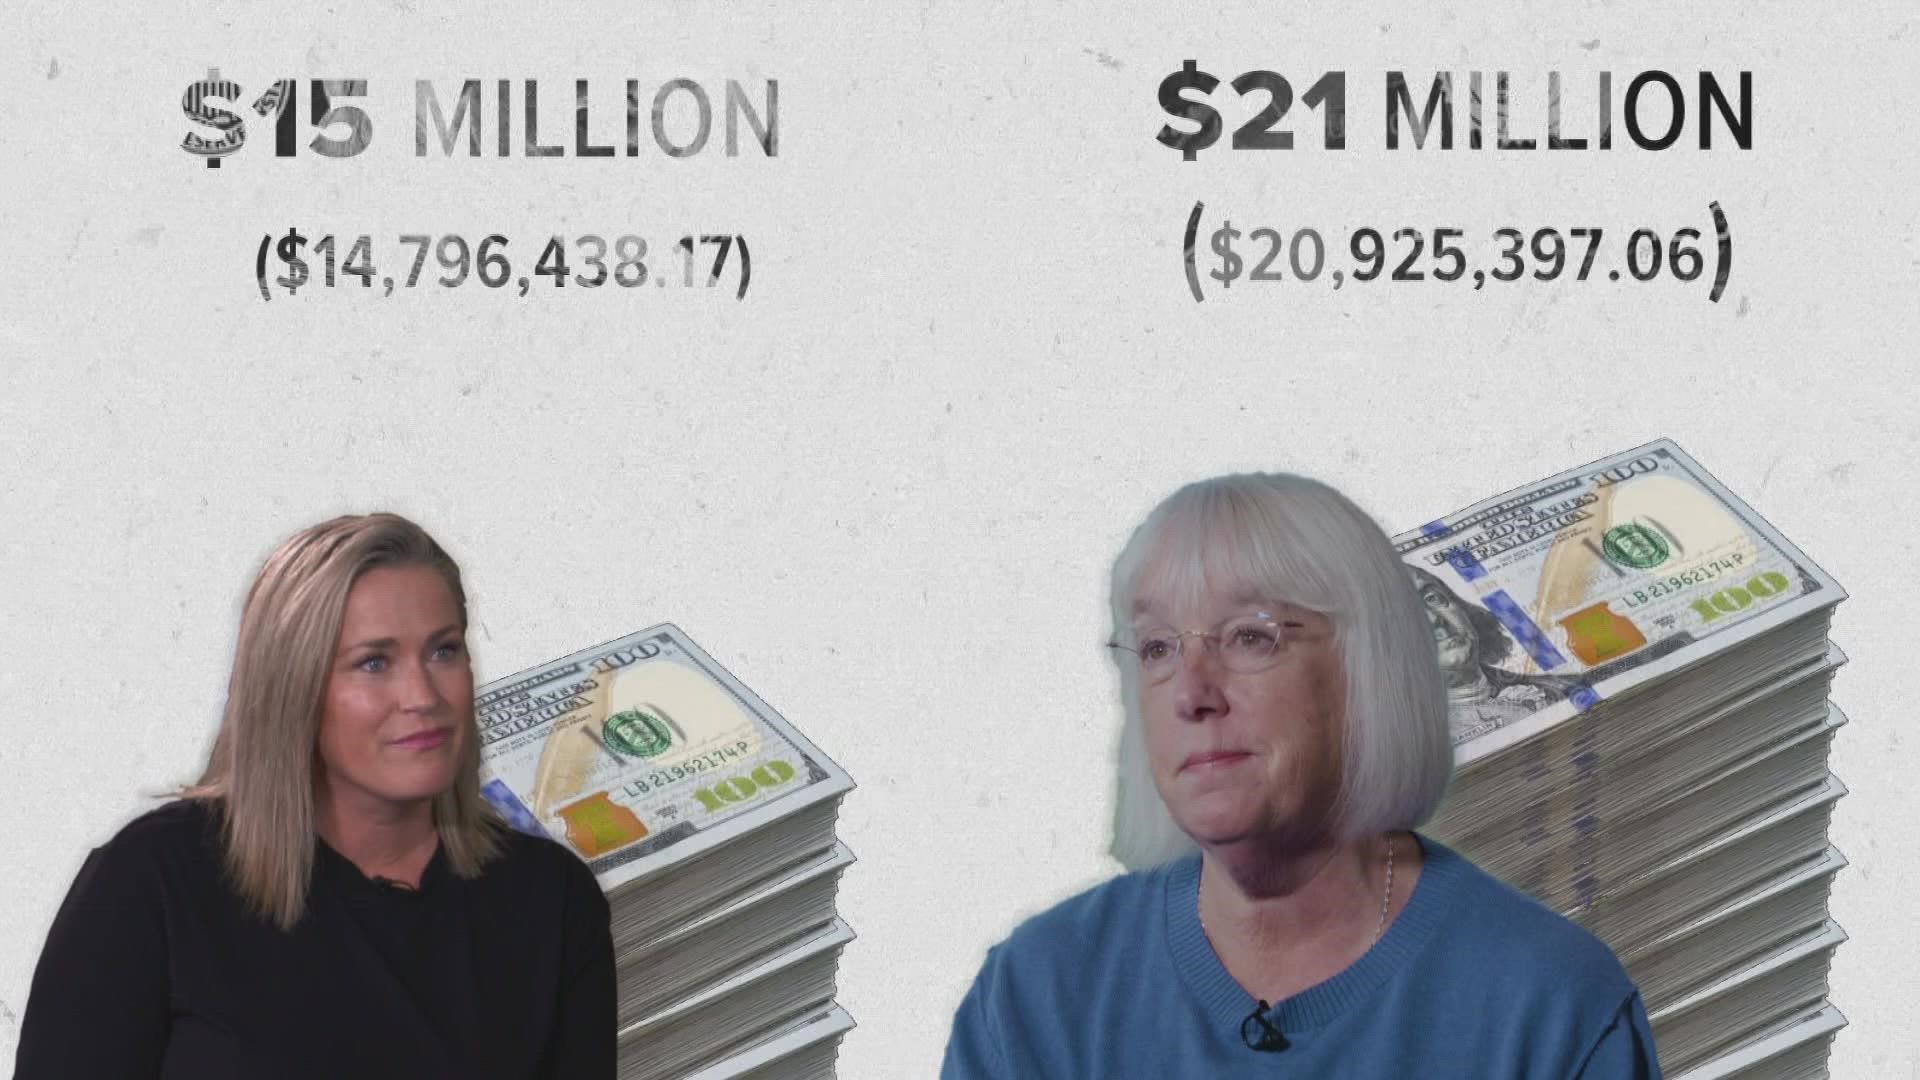 Incumbent Senator Patty Murray's campaign spent nearly $21 million and Smiley spent nearly $15 million. An analyst said that's close to a record amount.